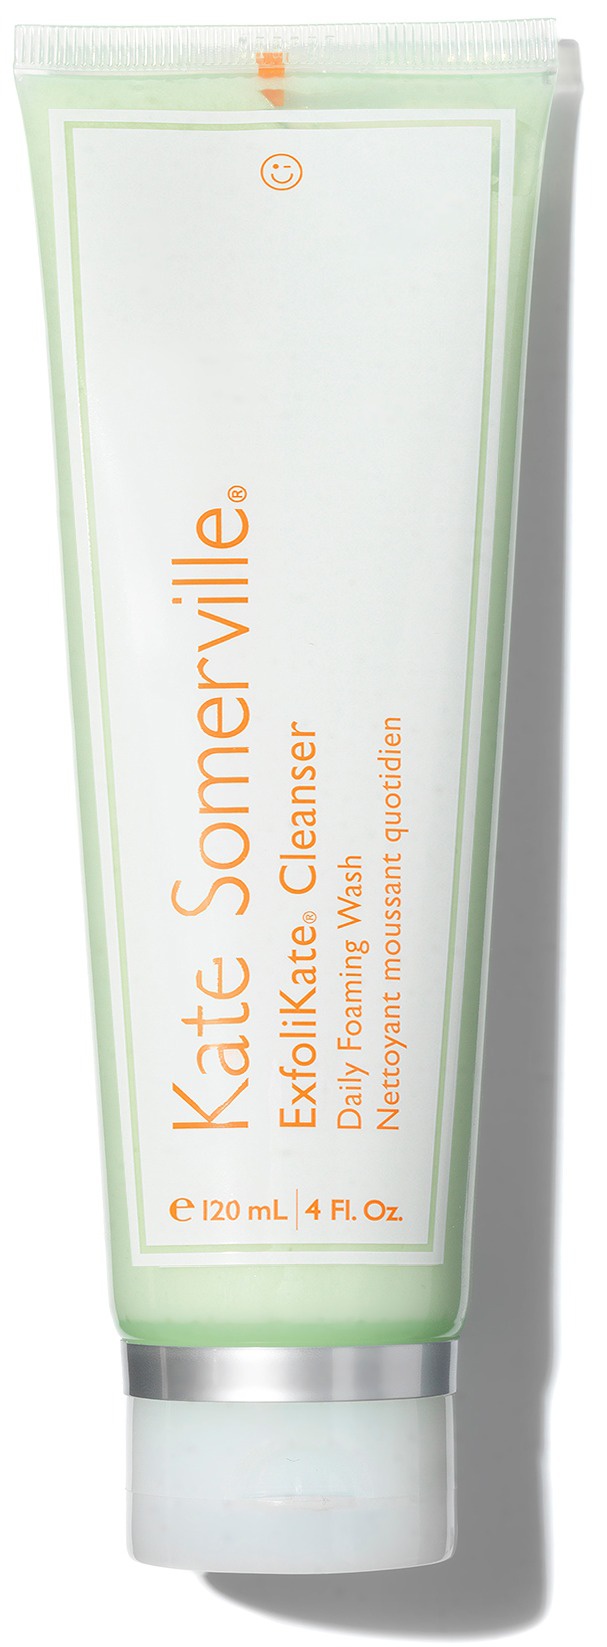 Kate Somerville Exfolikate® Cleanser Daily Foaming Wash